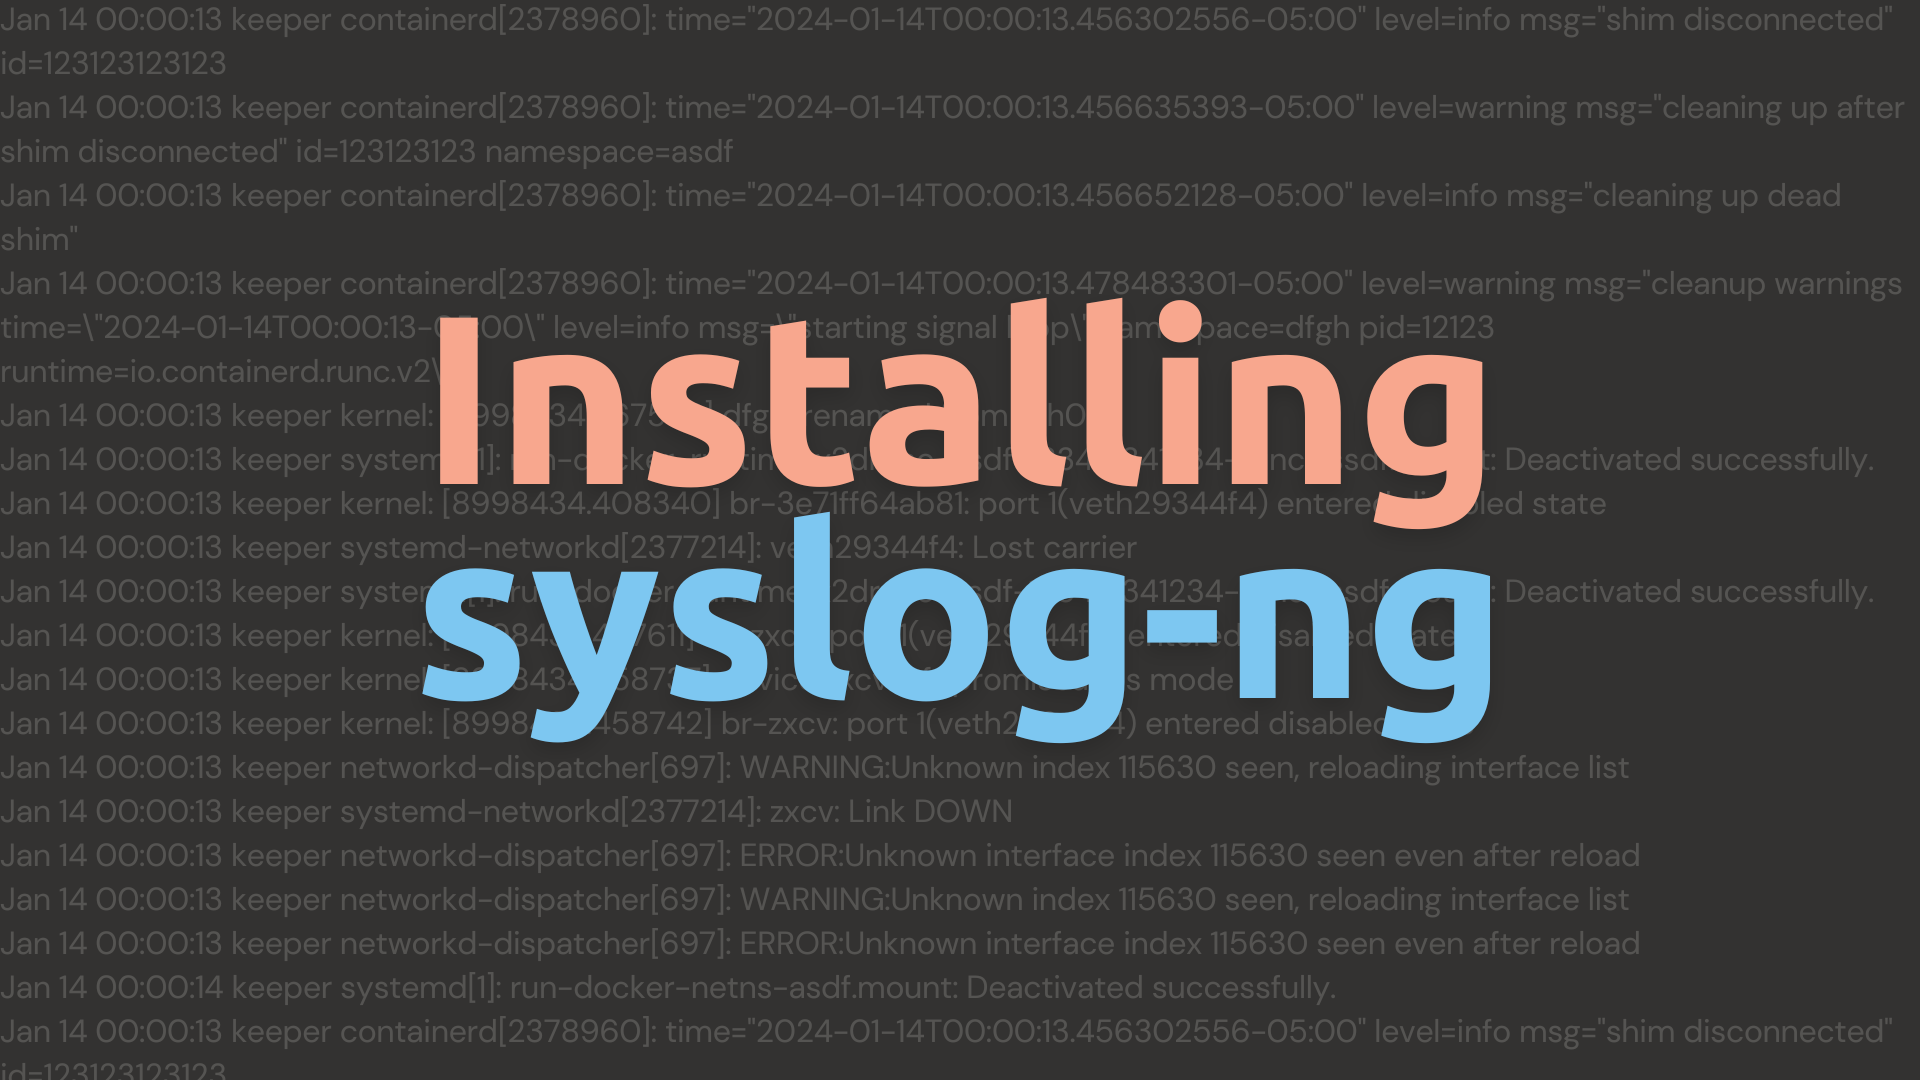 How to Install Syslog-NG on Linux - Ubuntu and Debian